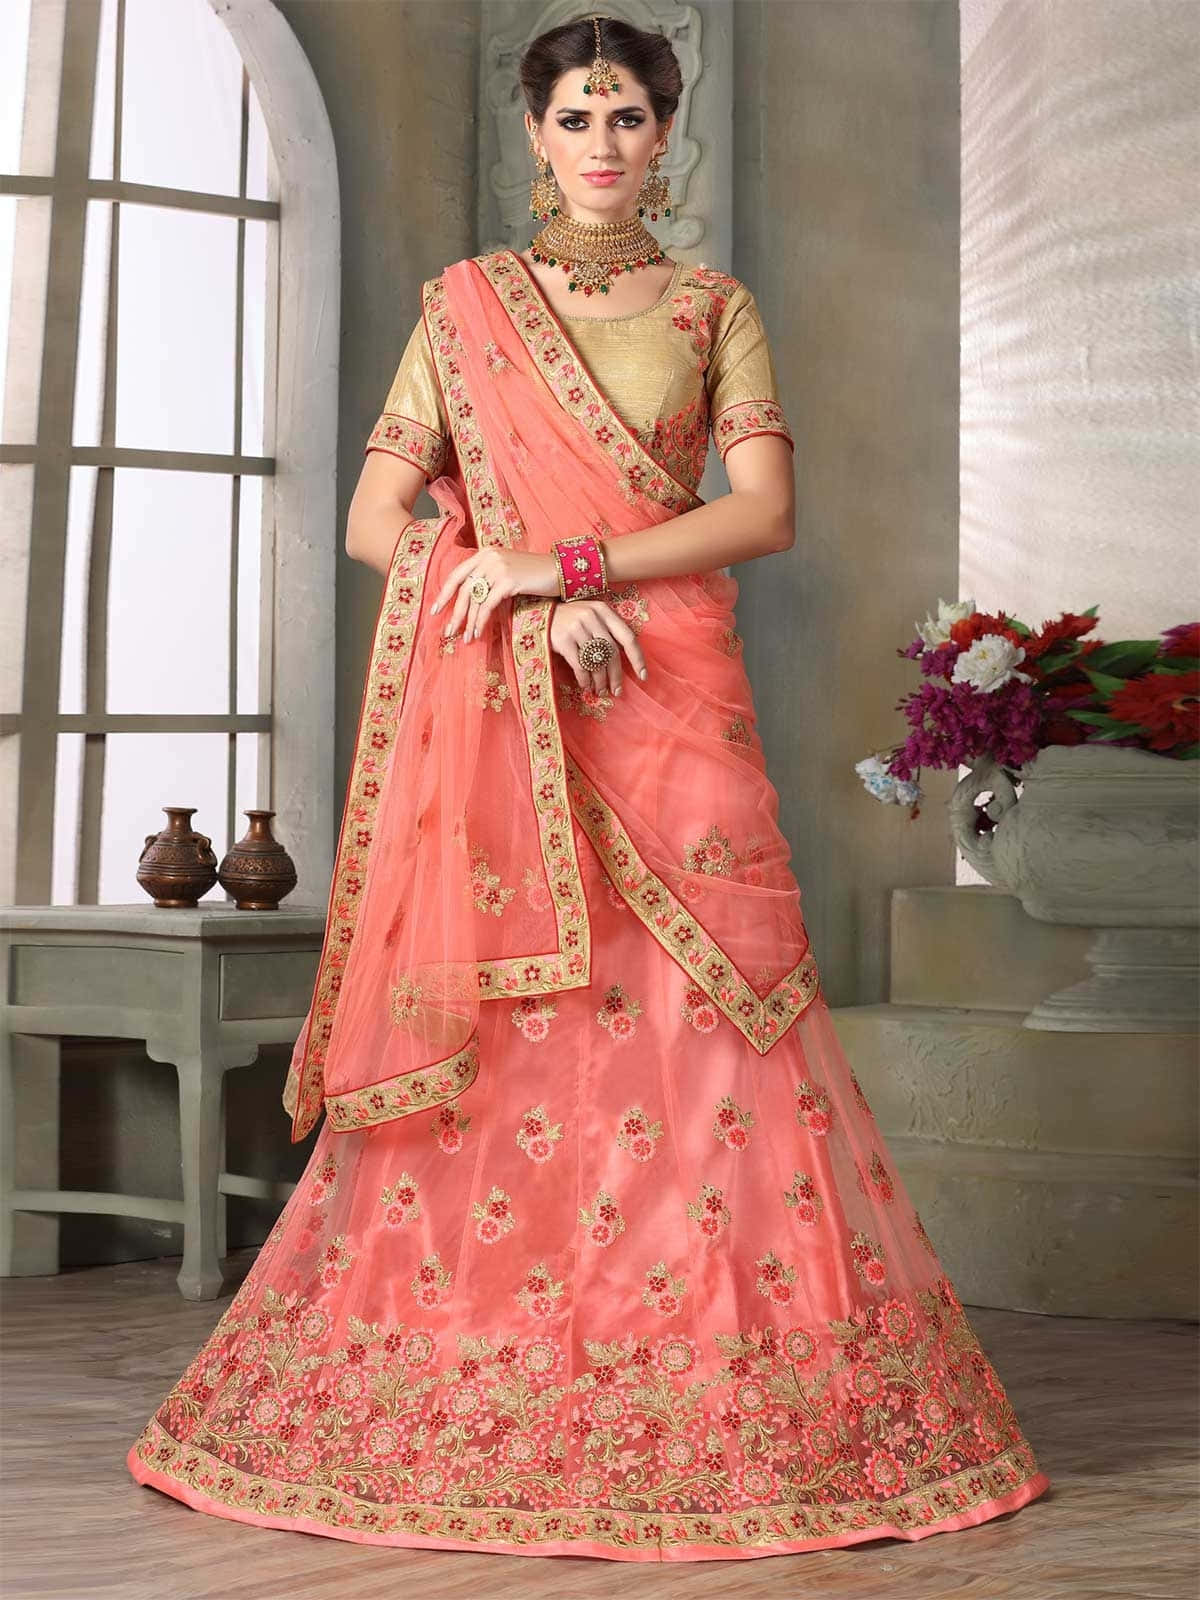 Indian Bride Peach Flowery Dress Picture